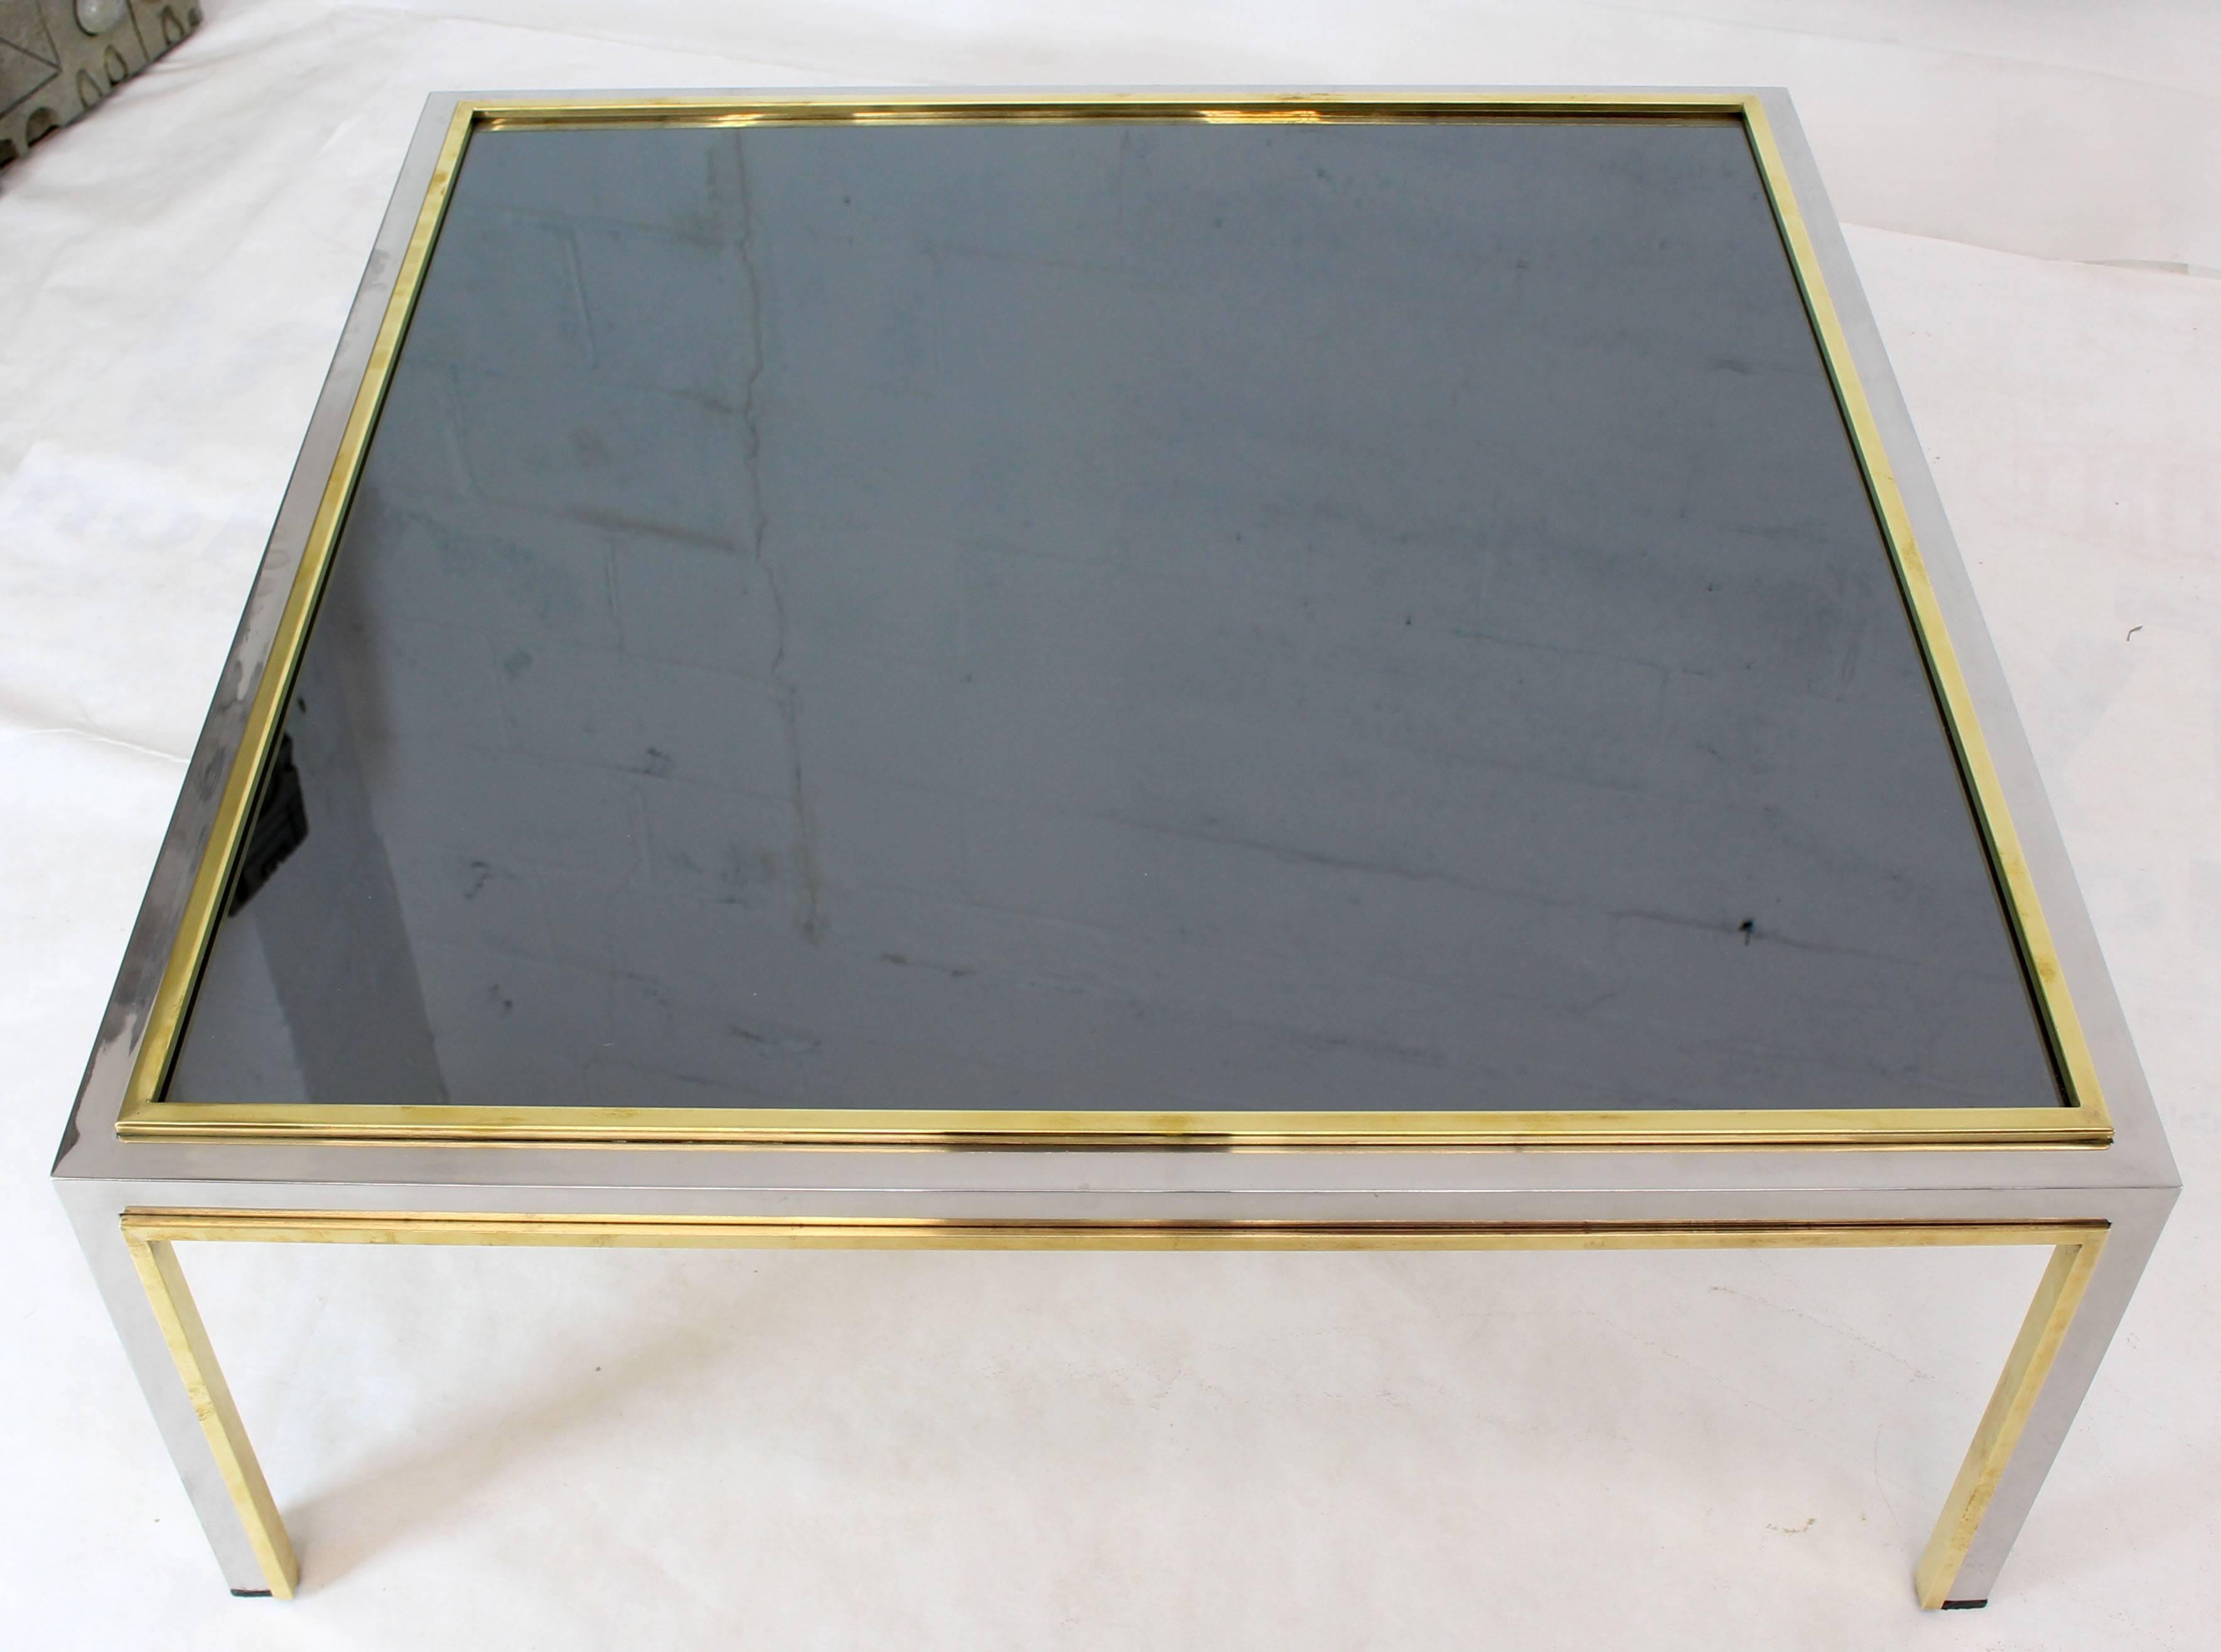 Brass Chrome Smoked Glass Willy Rizzo Square Coffee Table In Excellent Condition For Sale In Rockaway, NJ